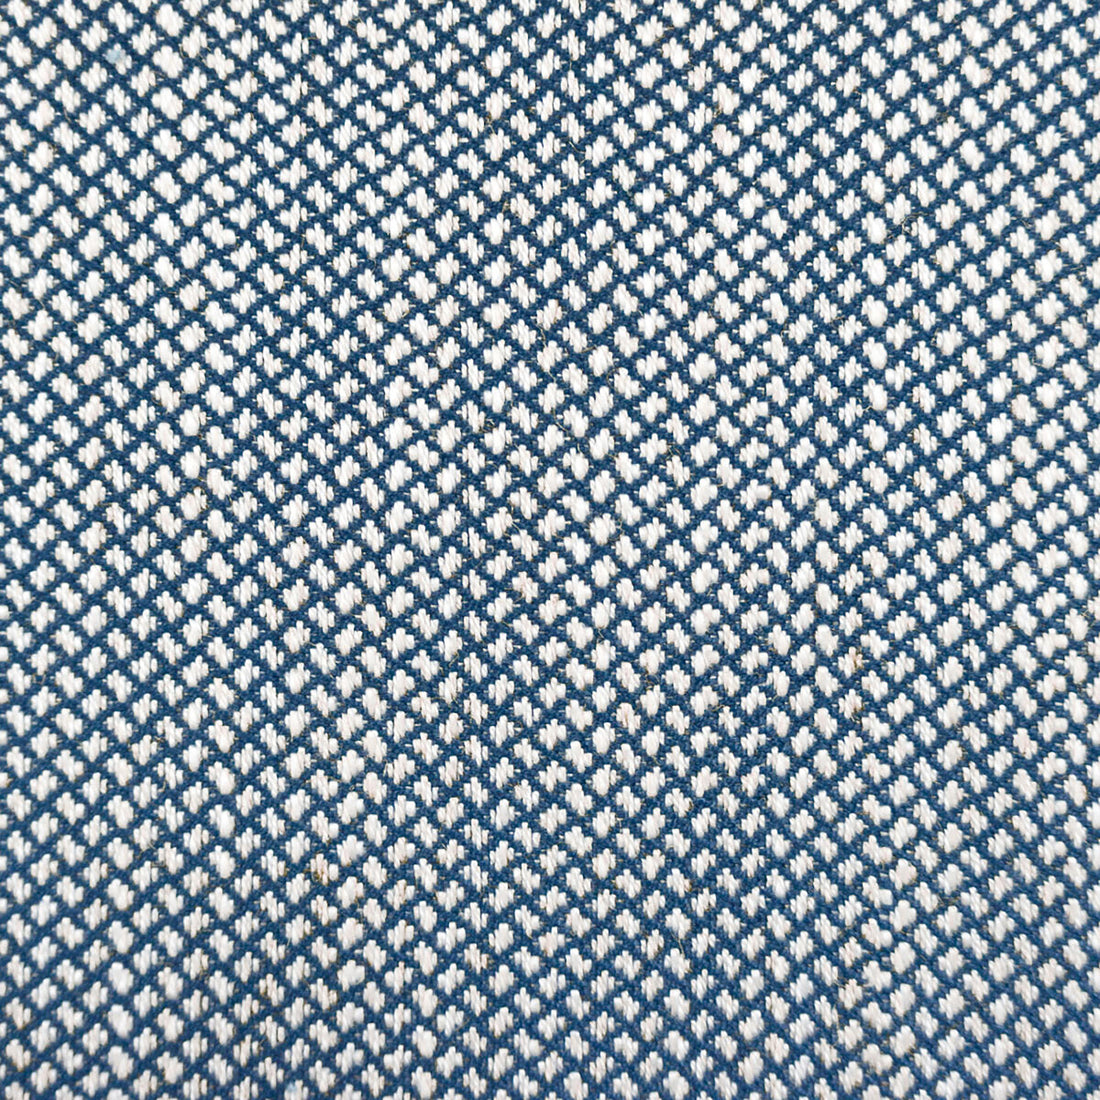 Sabuki fabric in azul color - pattern GDT5638.009.0 - by Gaston y Daniela in the Gaston Japon collection